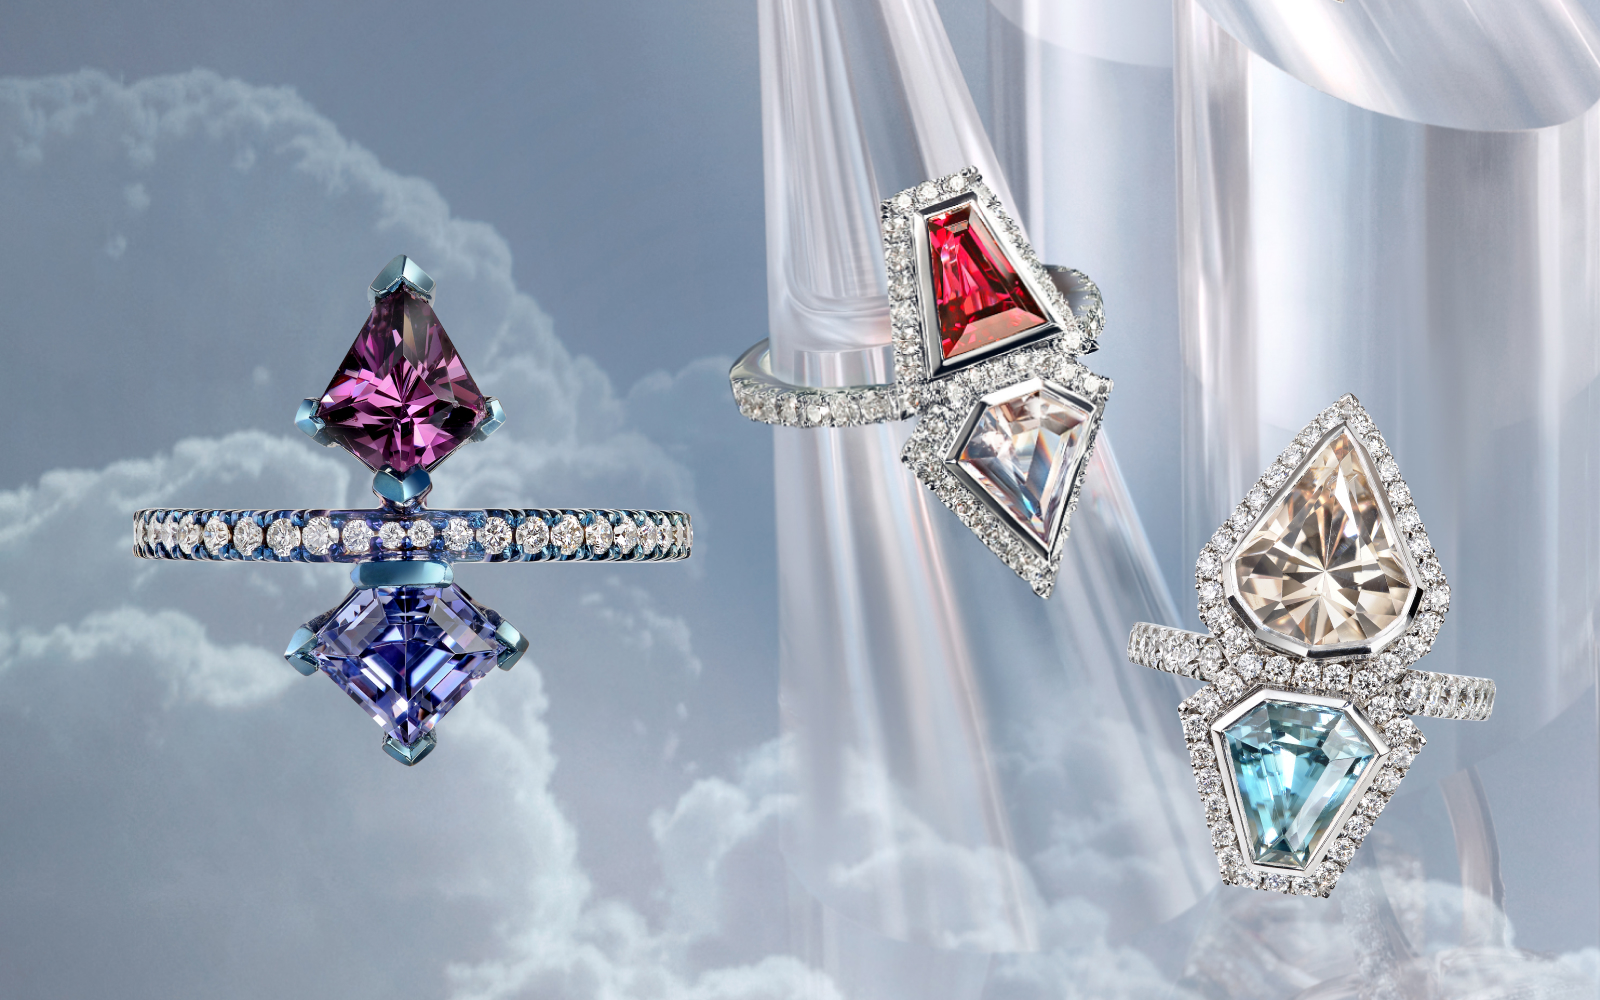 Sabine Roemer Calm & Peace, Unstoppable Fire and Go Deep to Rise rings in white gold, blue rhodium, spinel, sapphire, zircon, morganite and diamond from the Superwoman rings collection